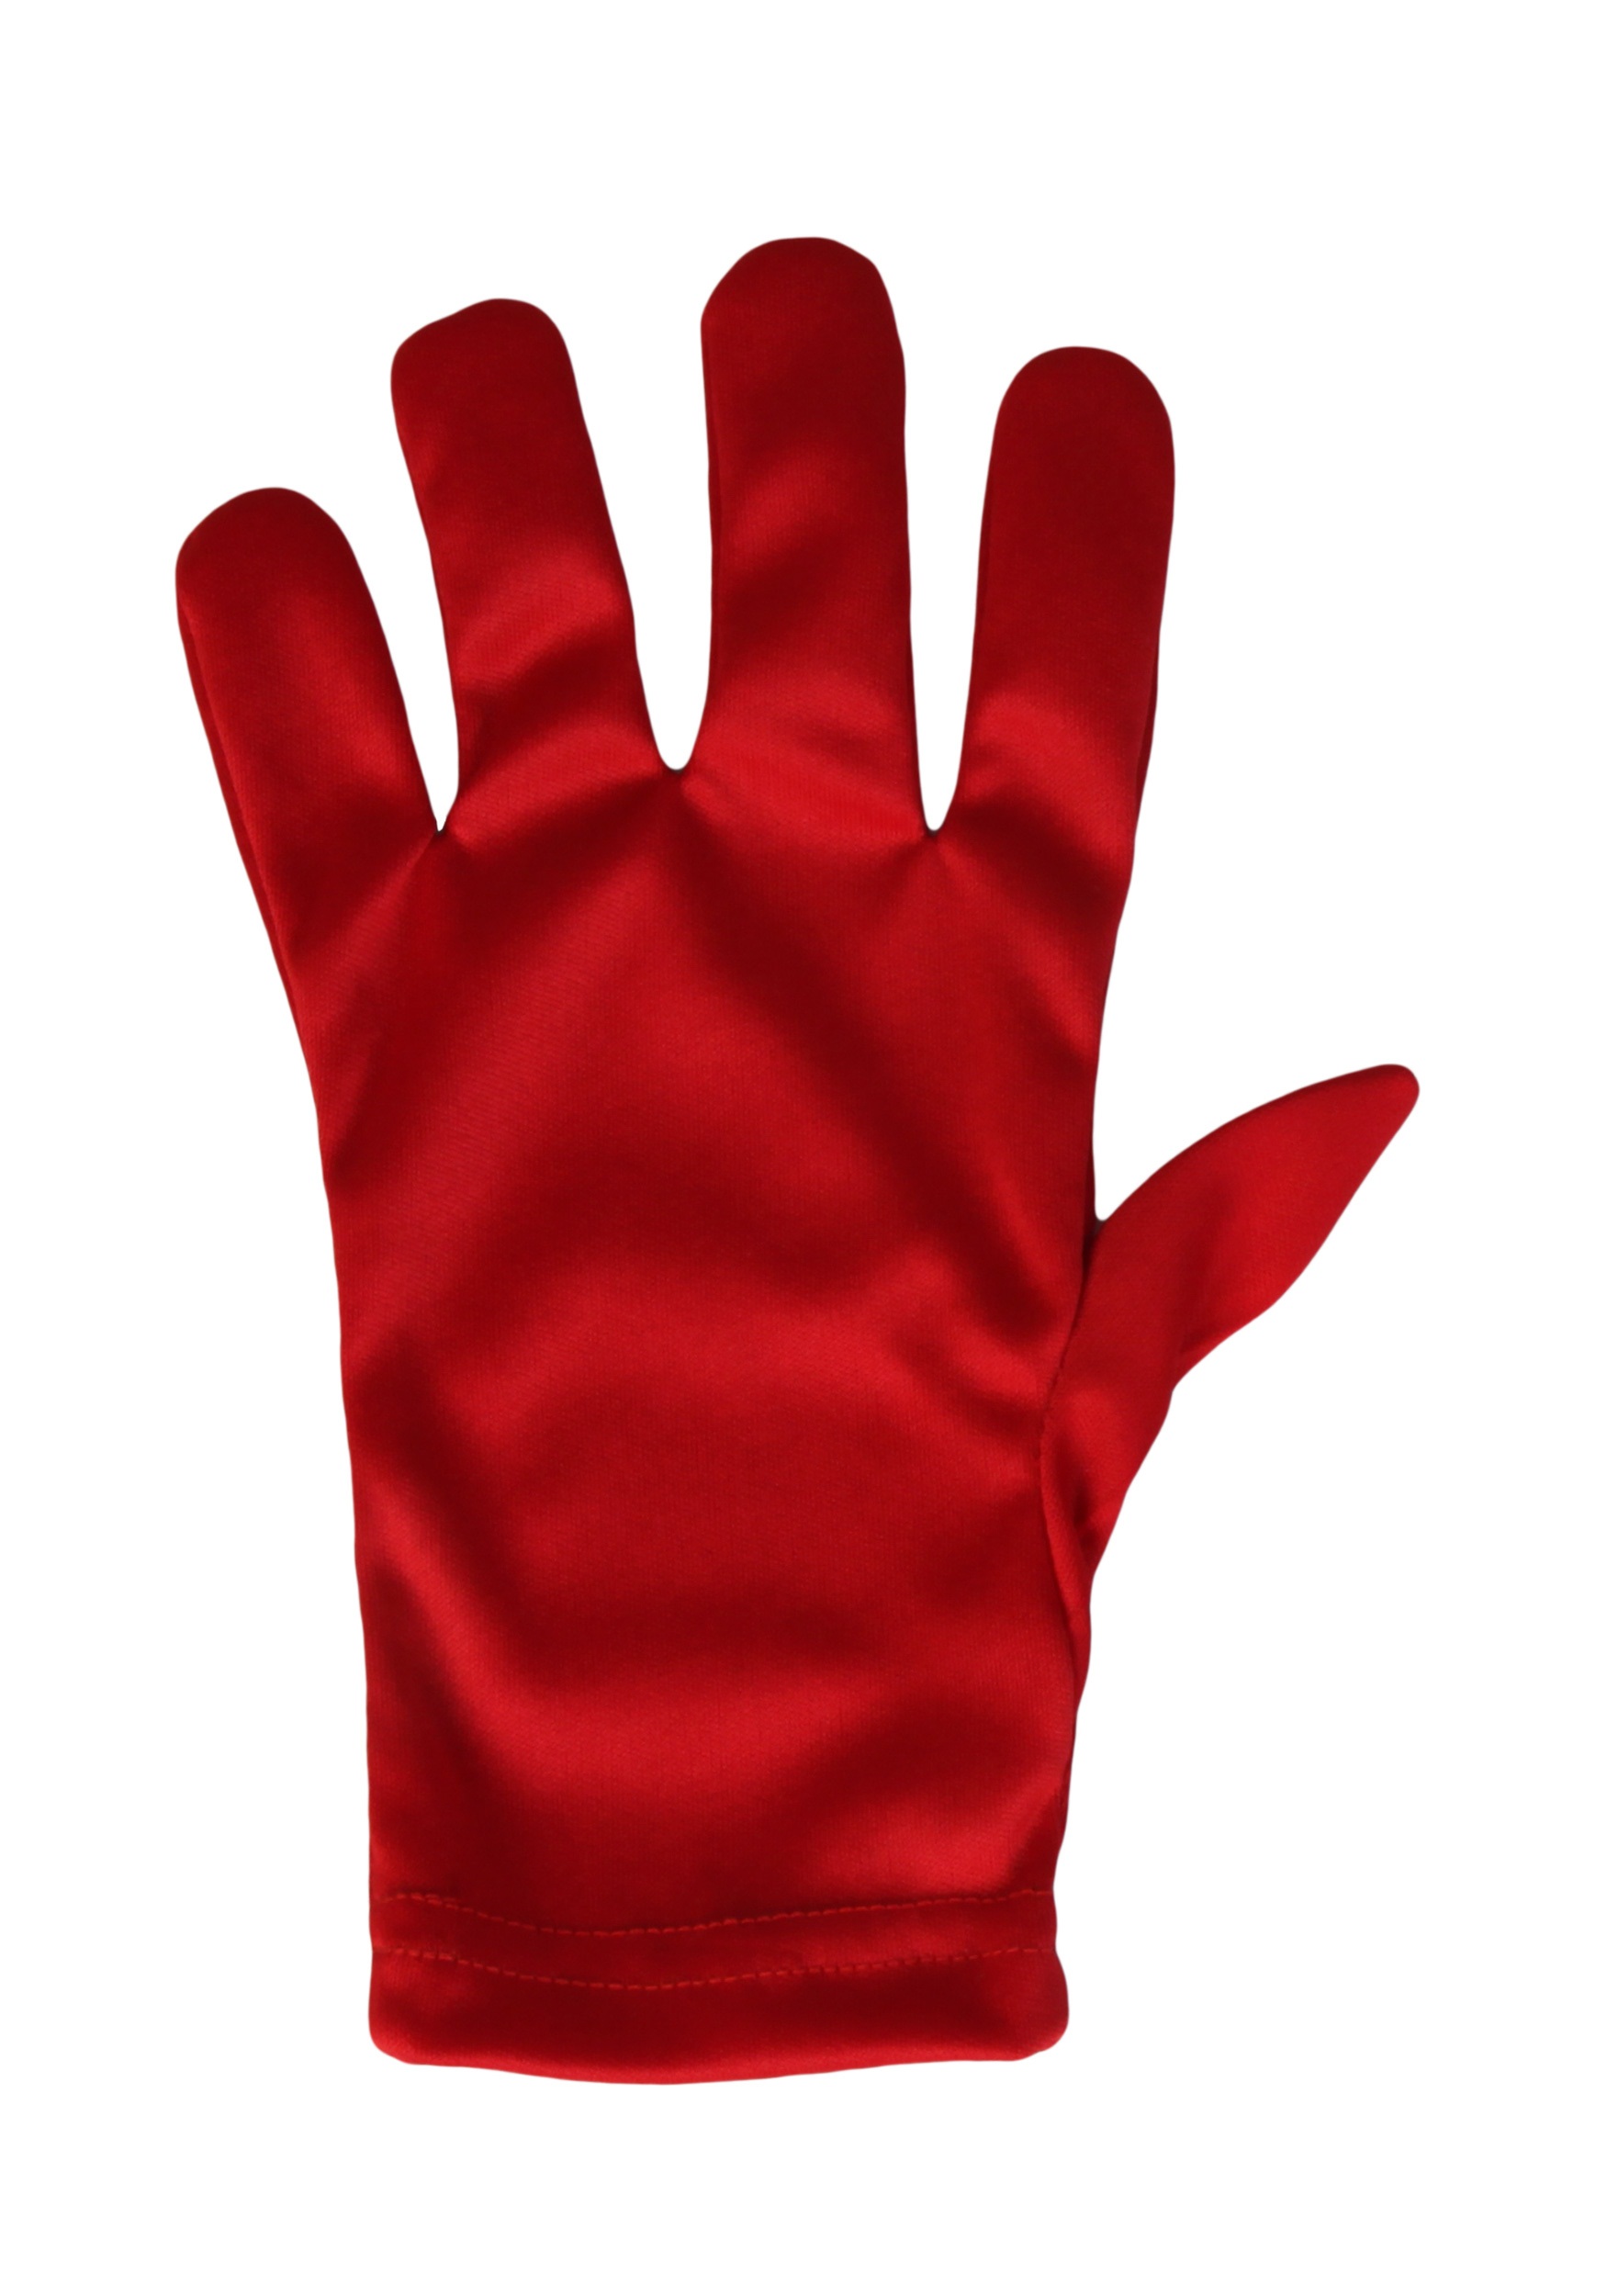 Pair of Red Gloves